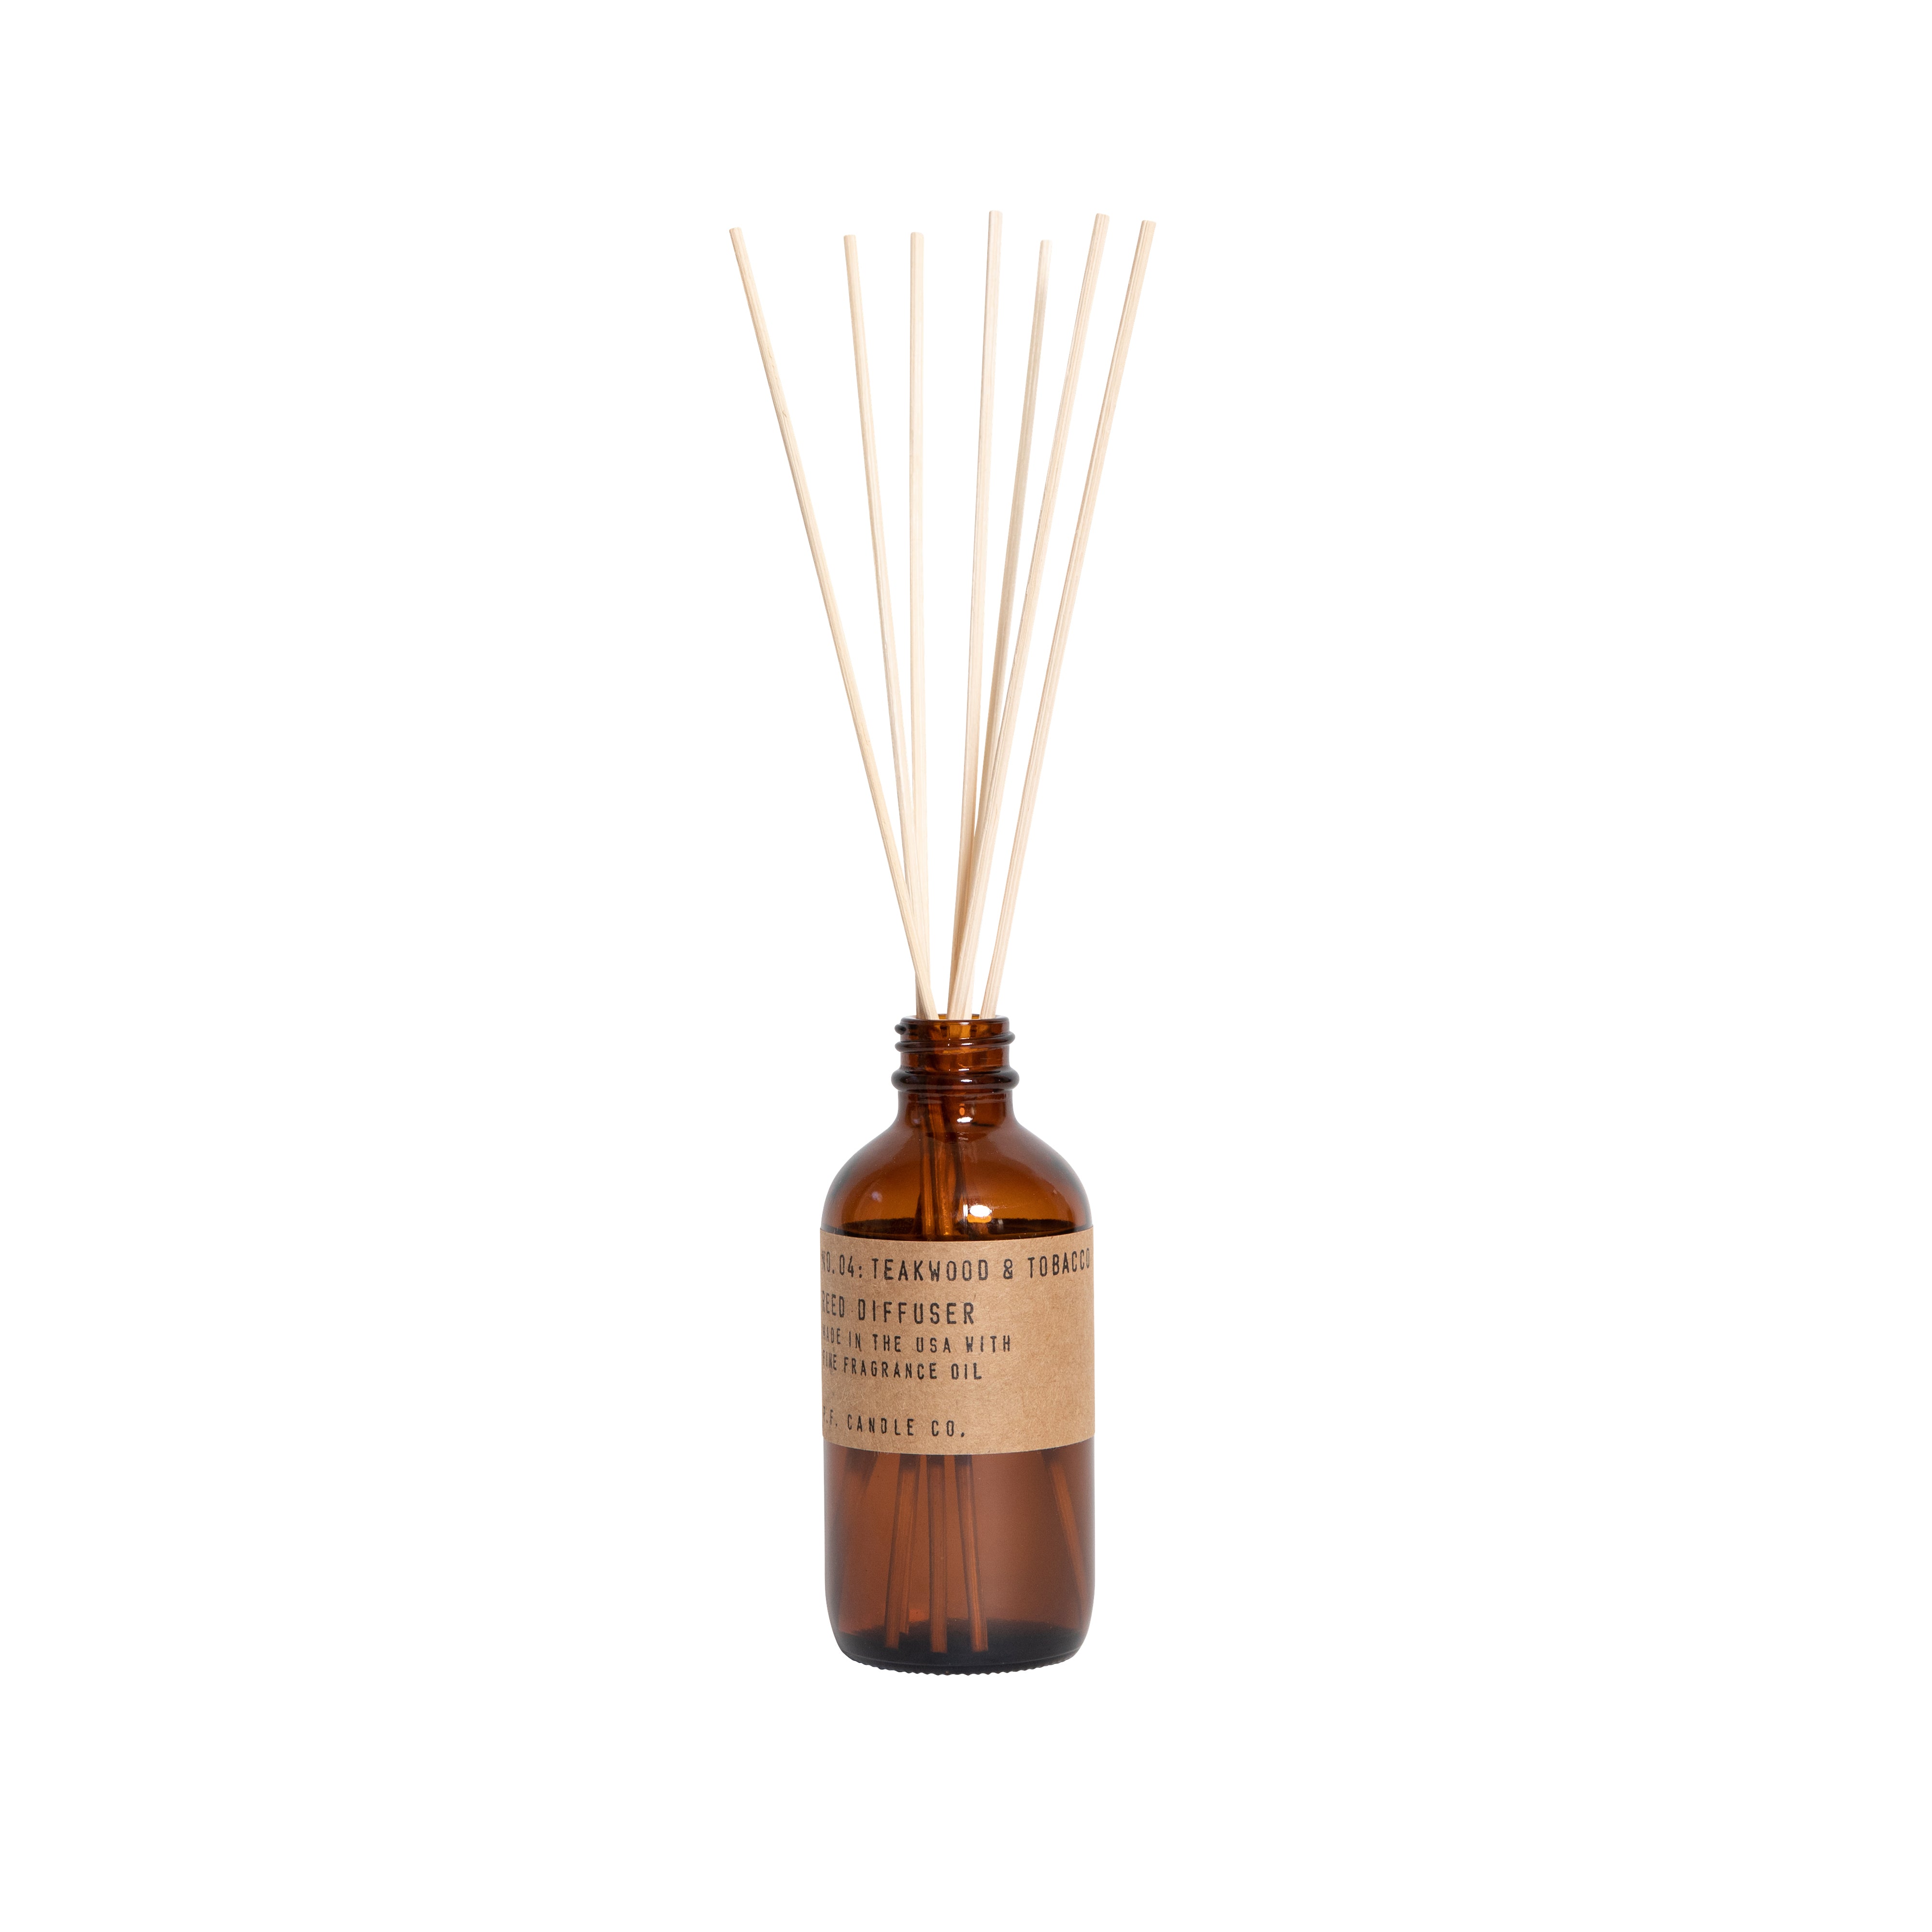  Scented Candle & Reed Diffuser Set for Home Fragrance, Lavender Woods Scented Candle for Men and Fragrance Diffuser